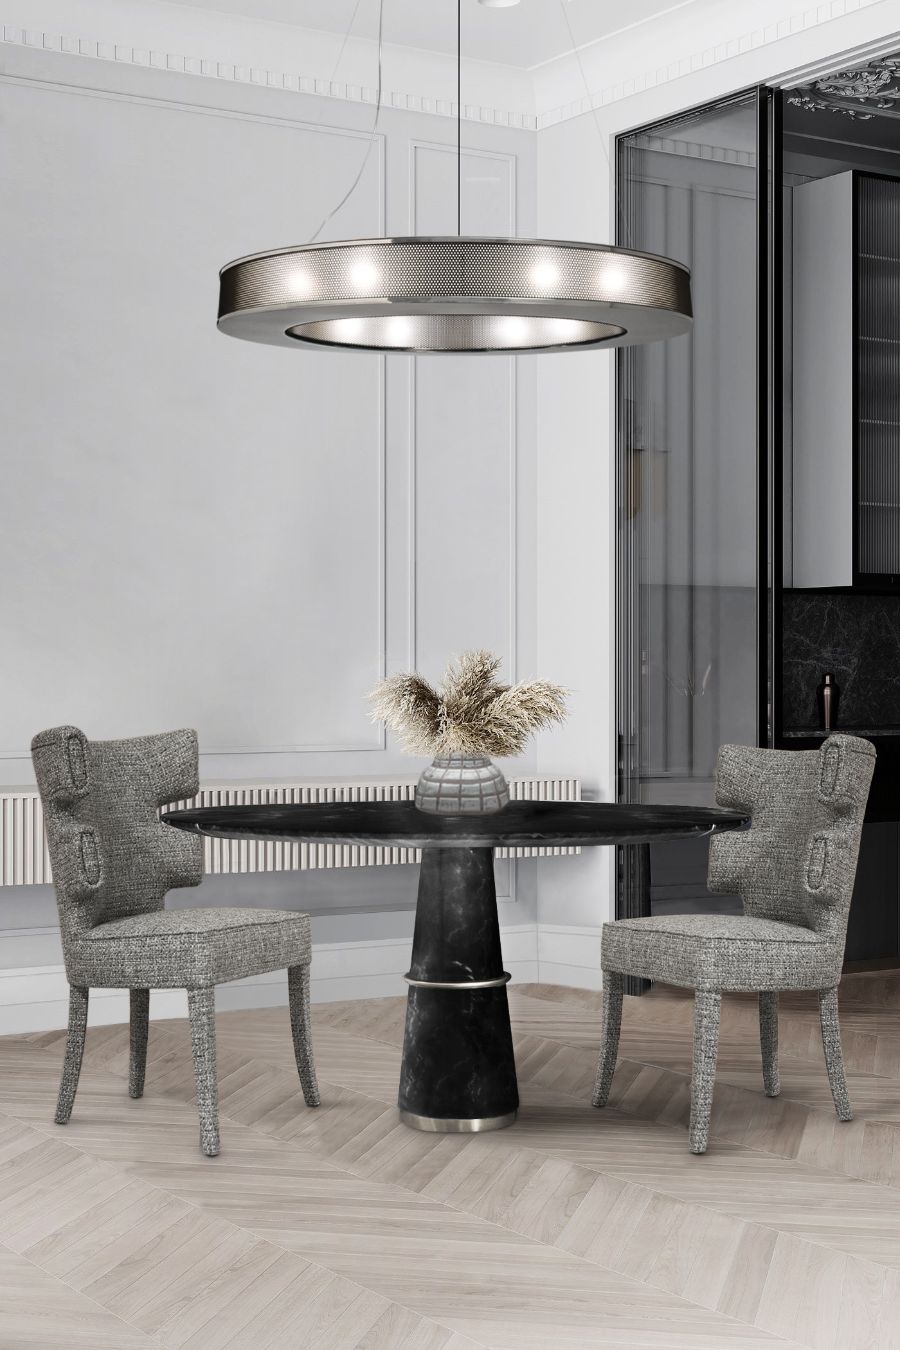 Dining Room Trends: Sophisticated and Timeless, Modern and Comfortable dining room trends Dining Room Trends: Sophisticated and Timeless, Modern and Comfortable Dining Room Trends Sophisticated and Timeless Modern and Comfortable 5